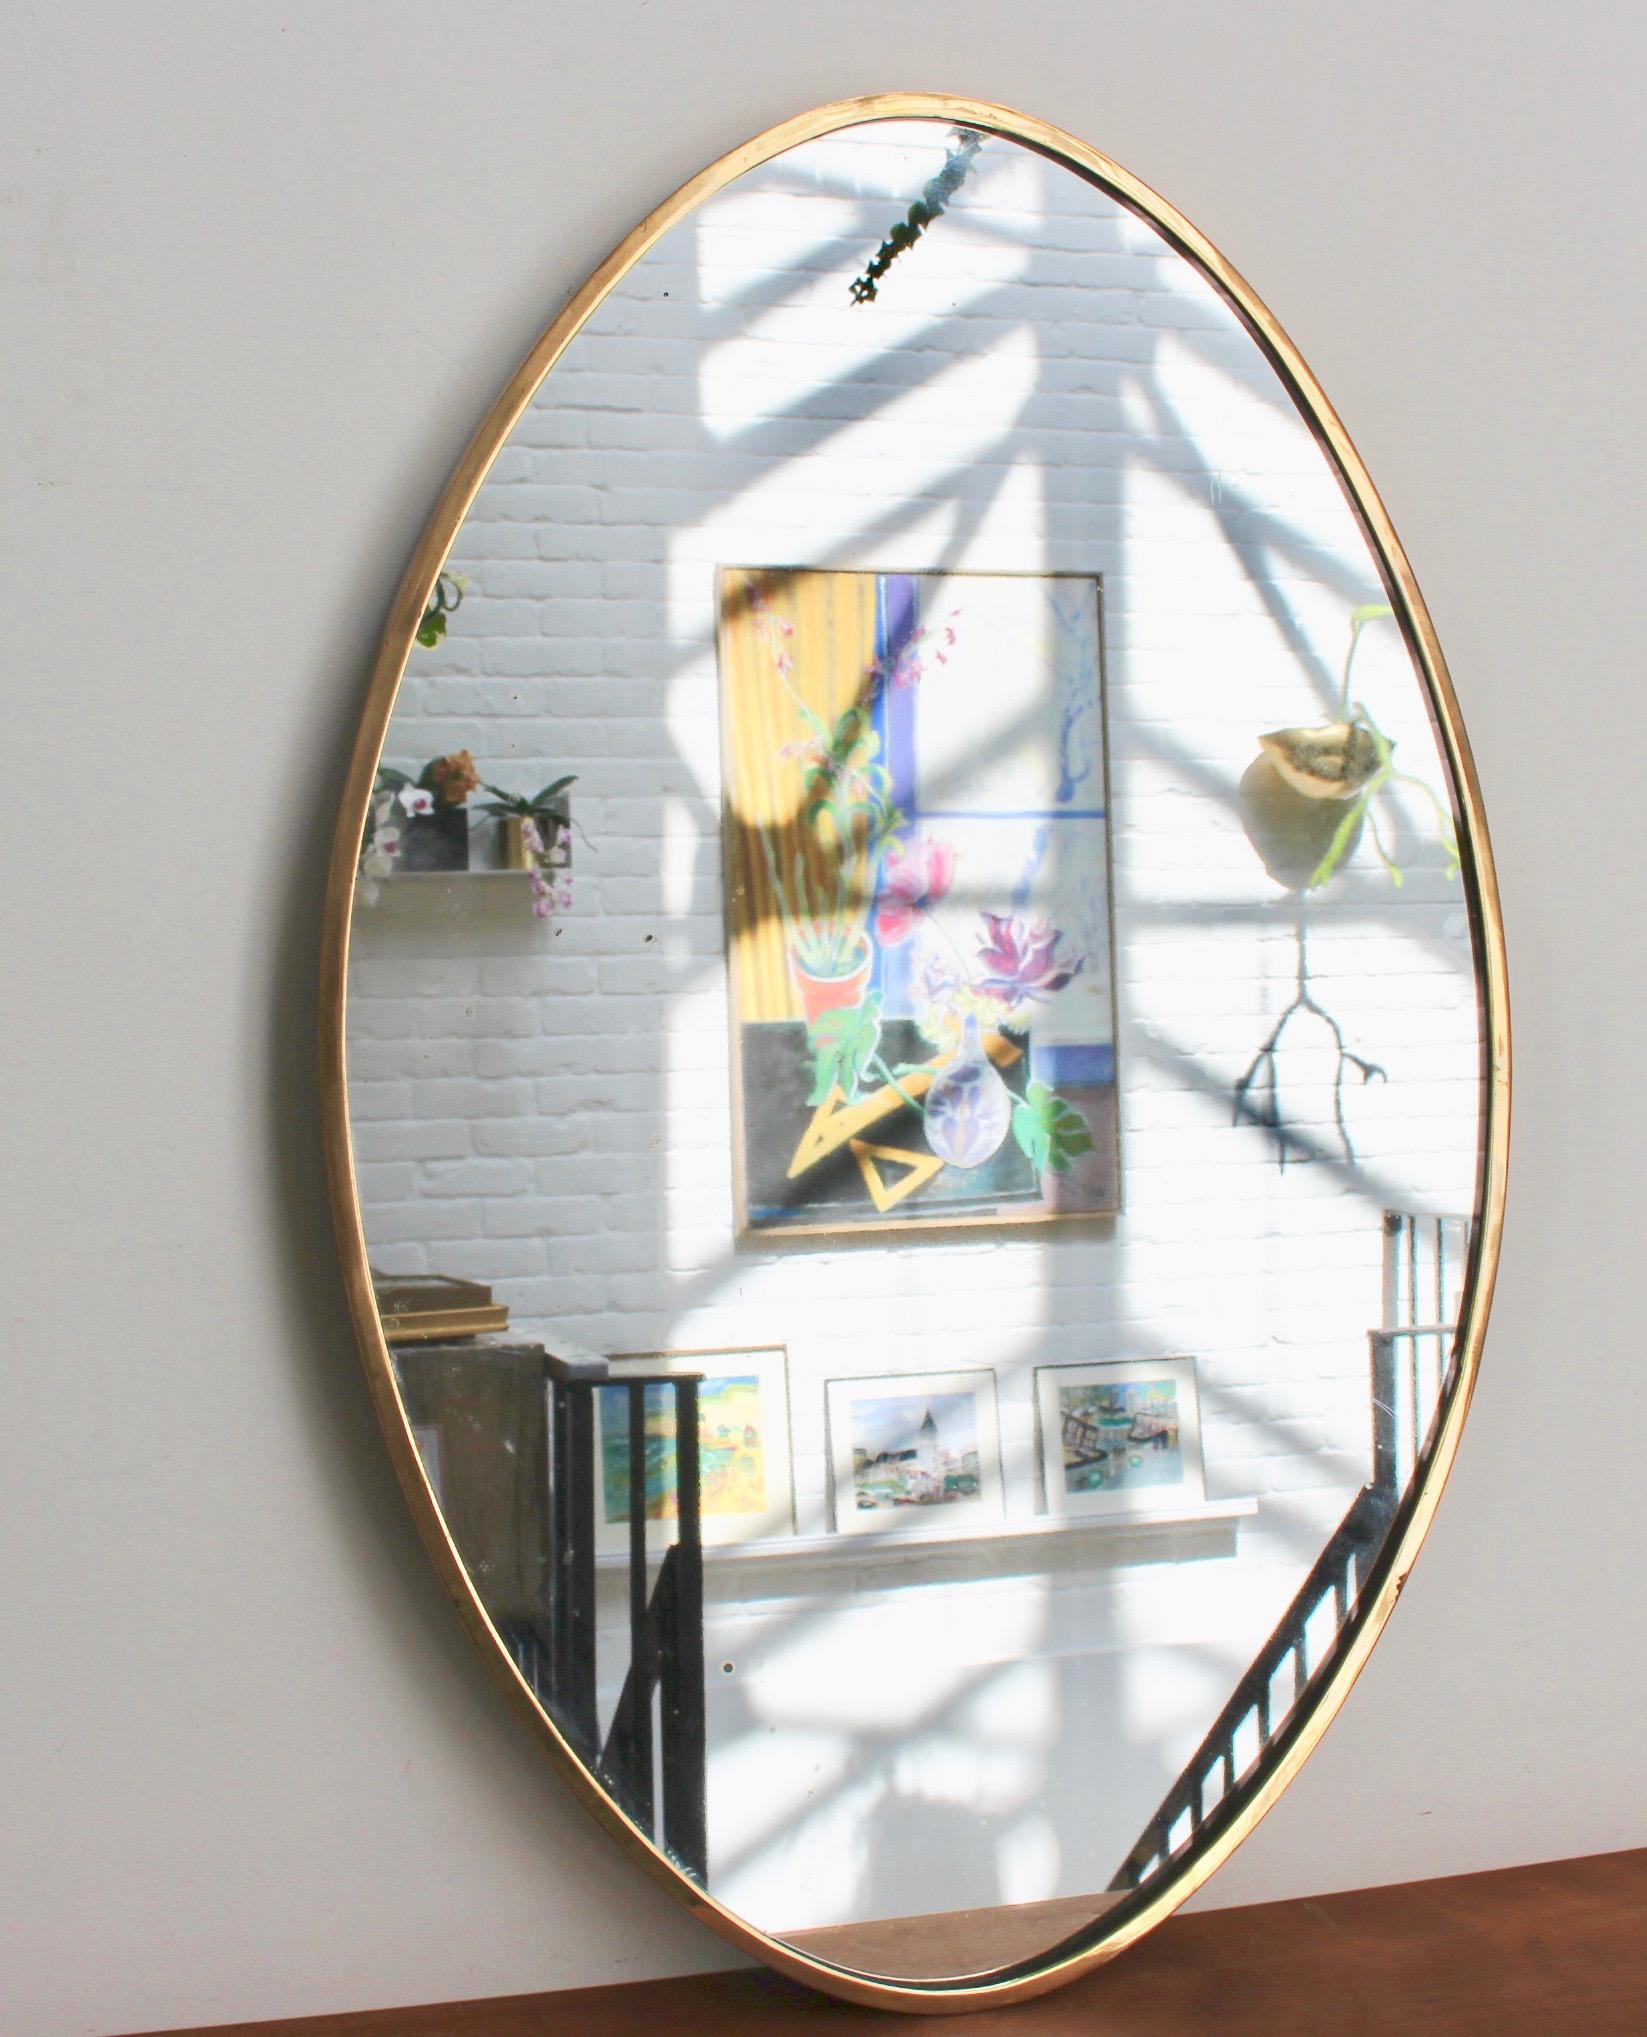 Midcentury Italian oval wall mirror with brass frame (circa 1950s). The mirror is oval in shape and very smart with irresistible durability. The visual impression is elegant and very distinctive in a modern Gio Ponti style. The mirror is in fair